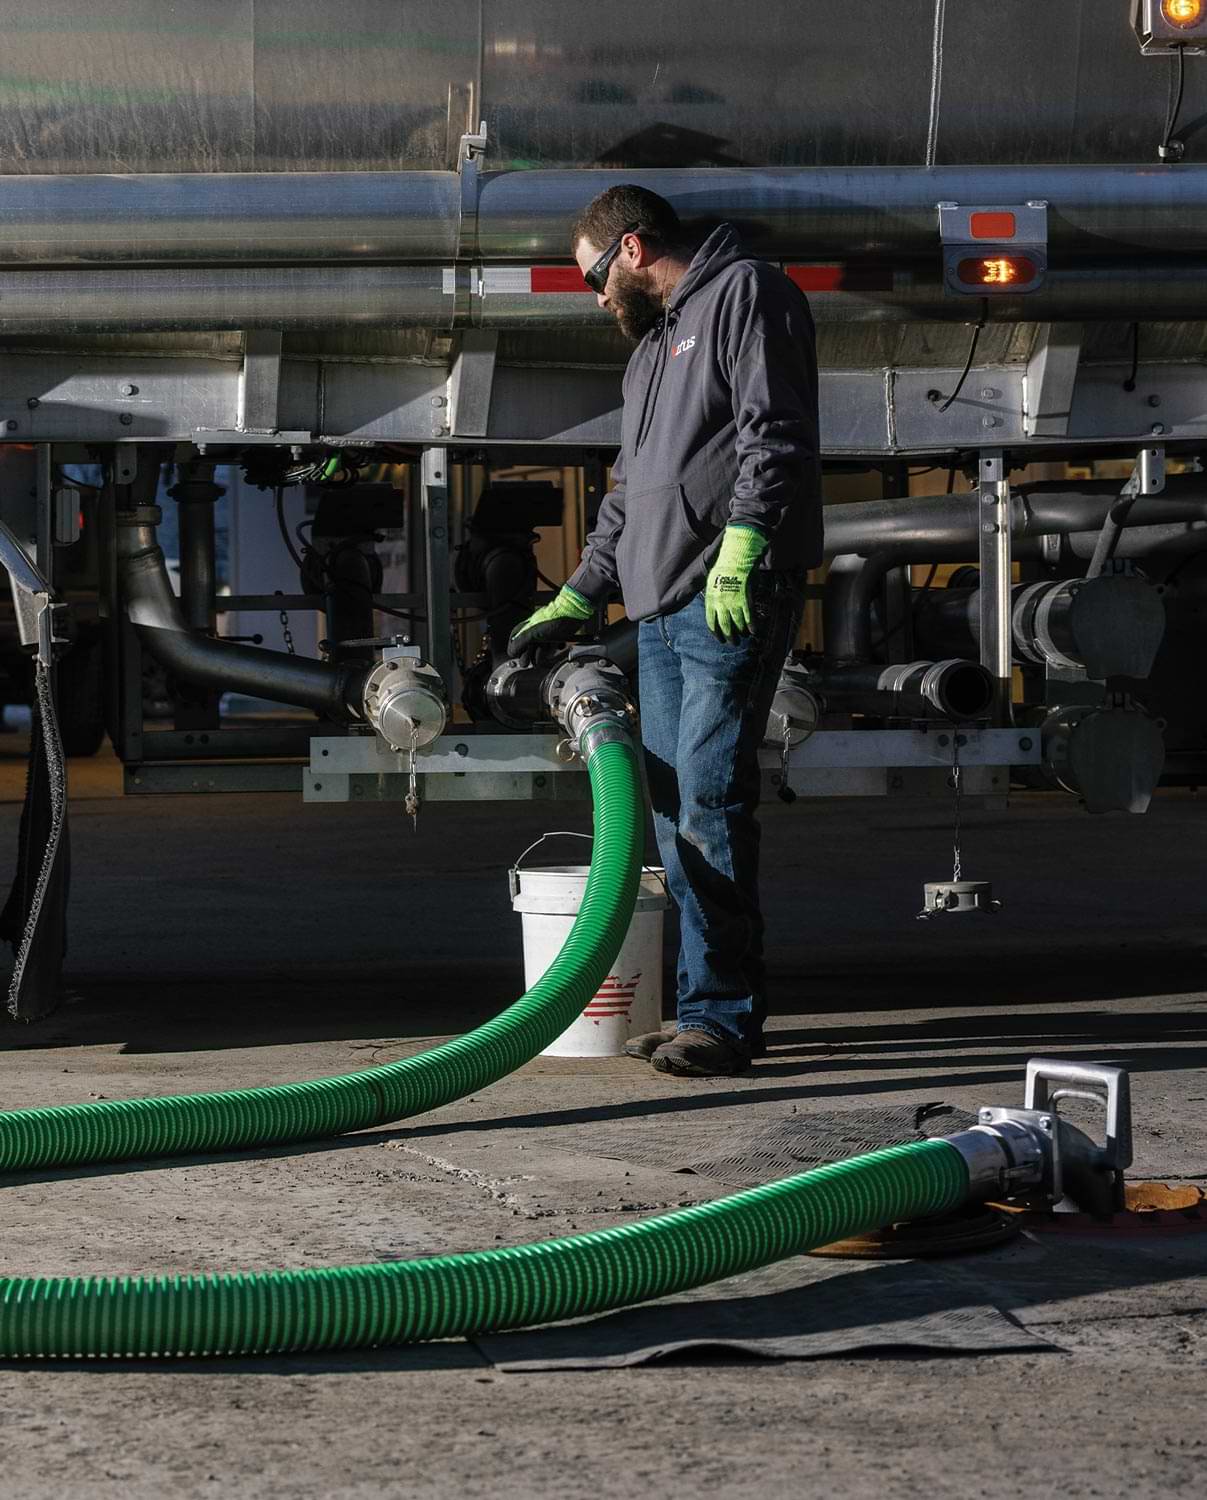 a fuel truck operator observes the hose end connected to the fuel truck during pumping